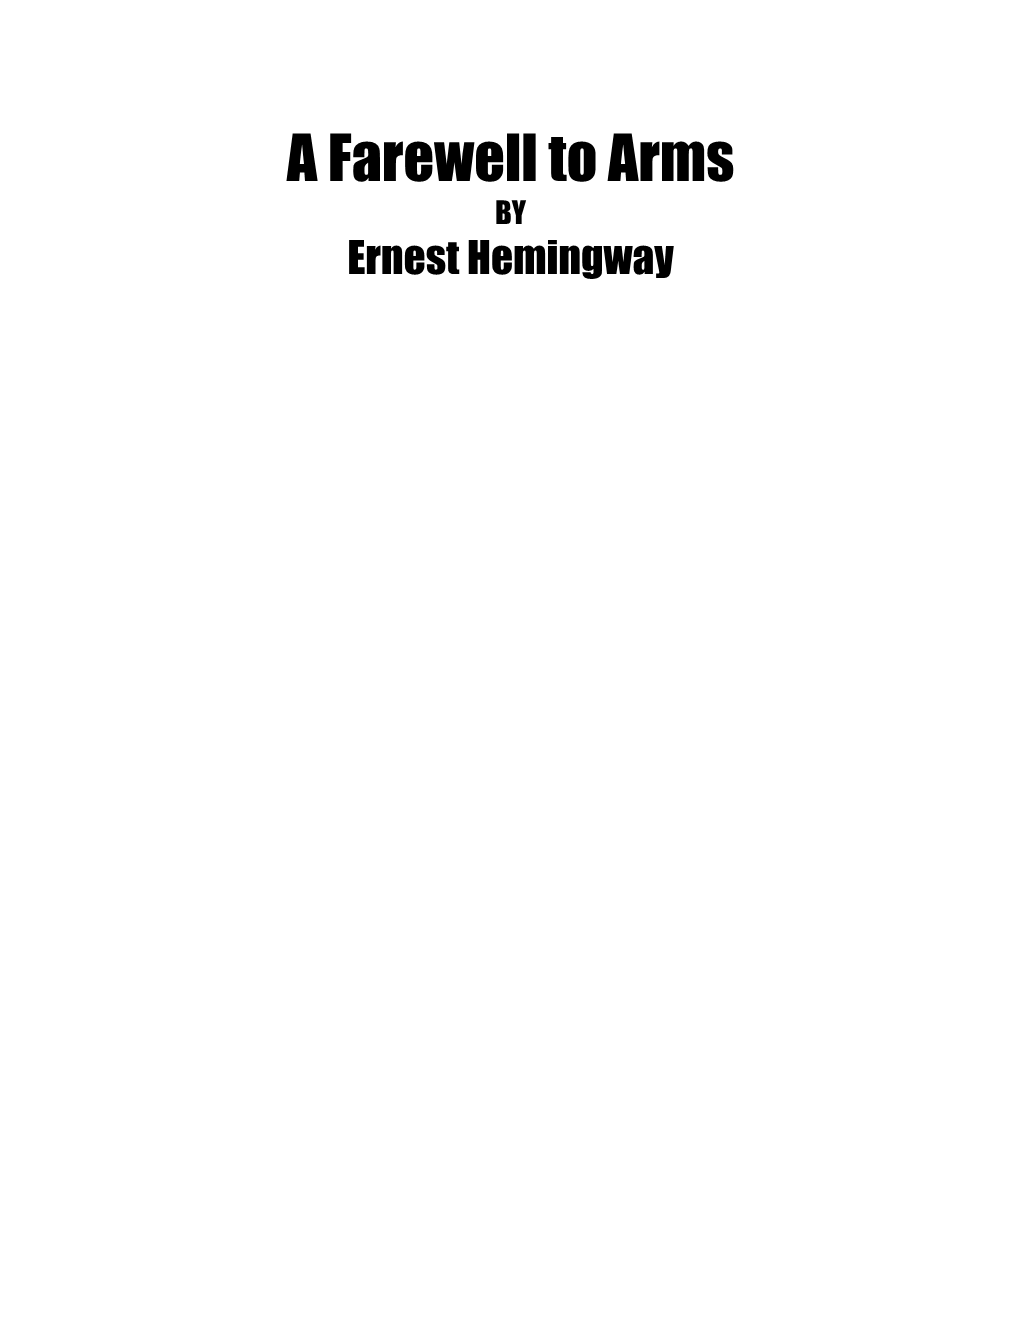 A Farewell to Arms, by Ernest Hemingway